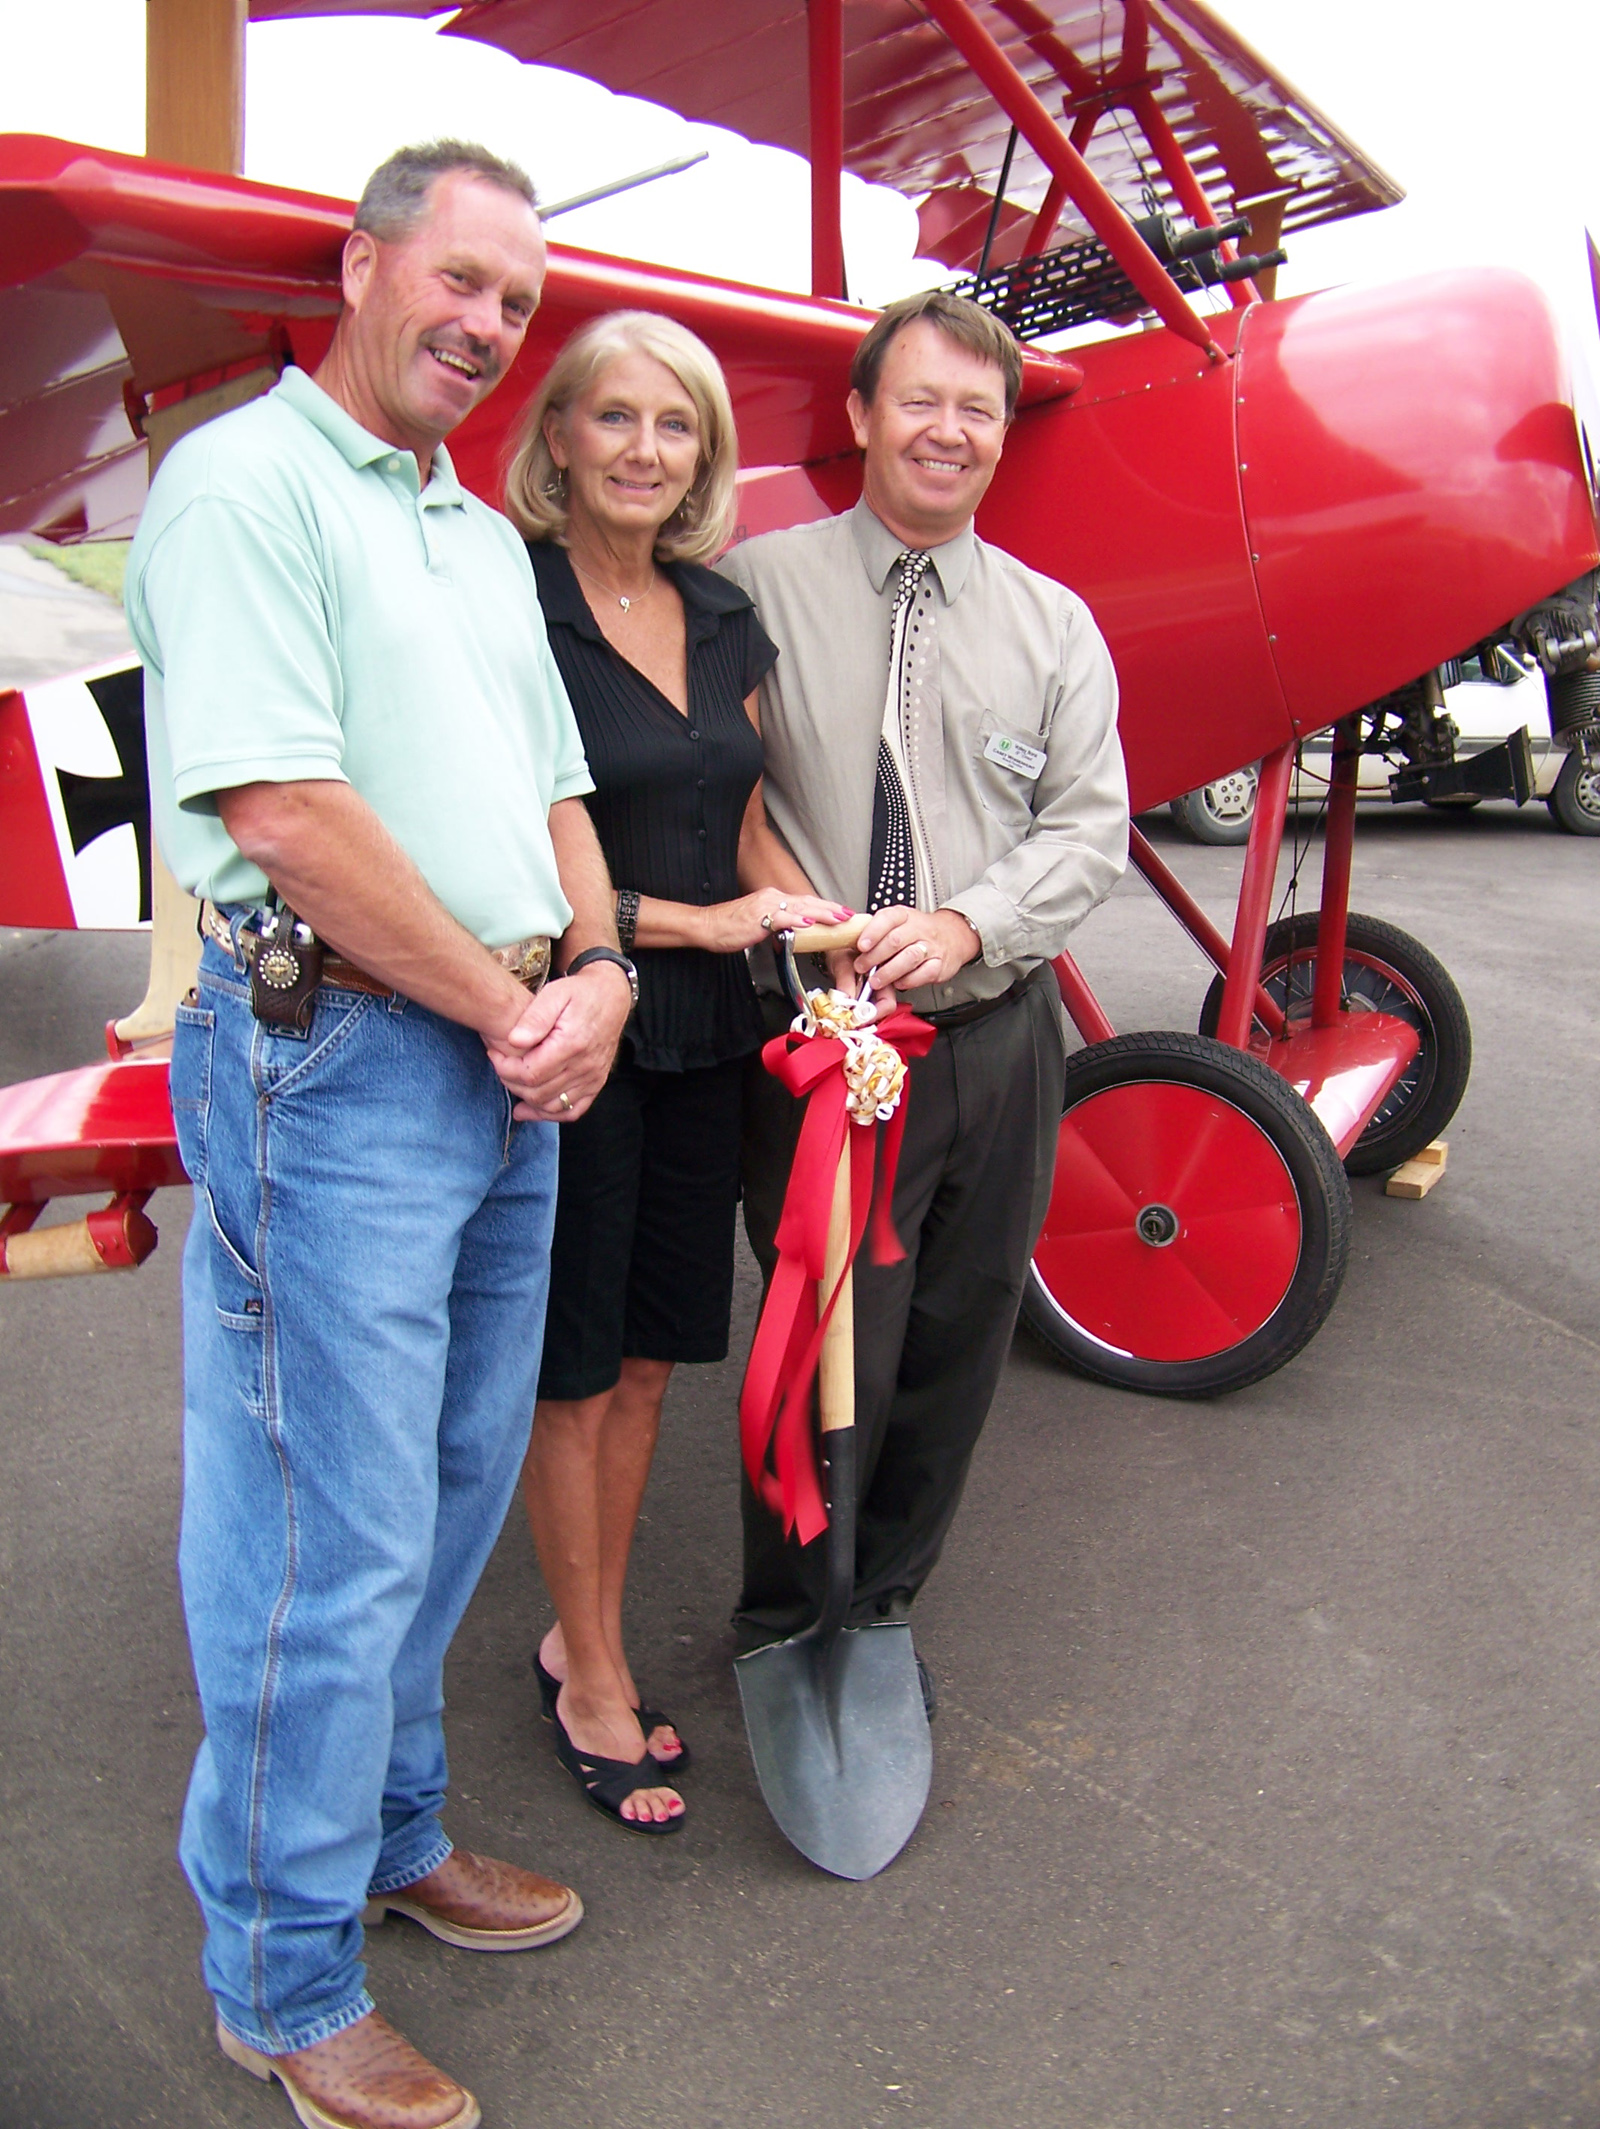 Eagle’s Nest to Provide Assisted Living for Aviators and Aviation Enthusiasts